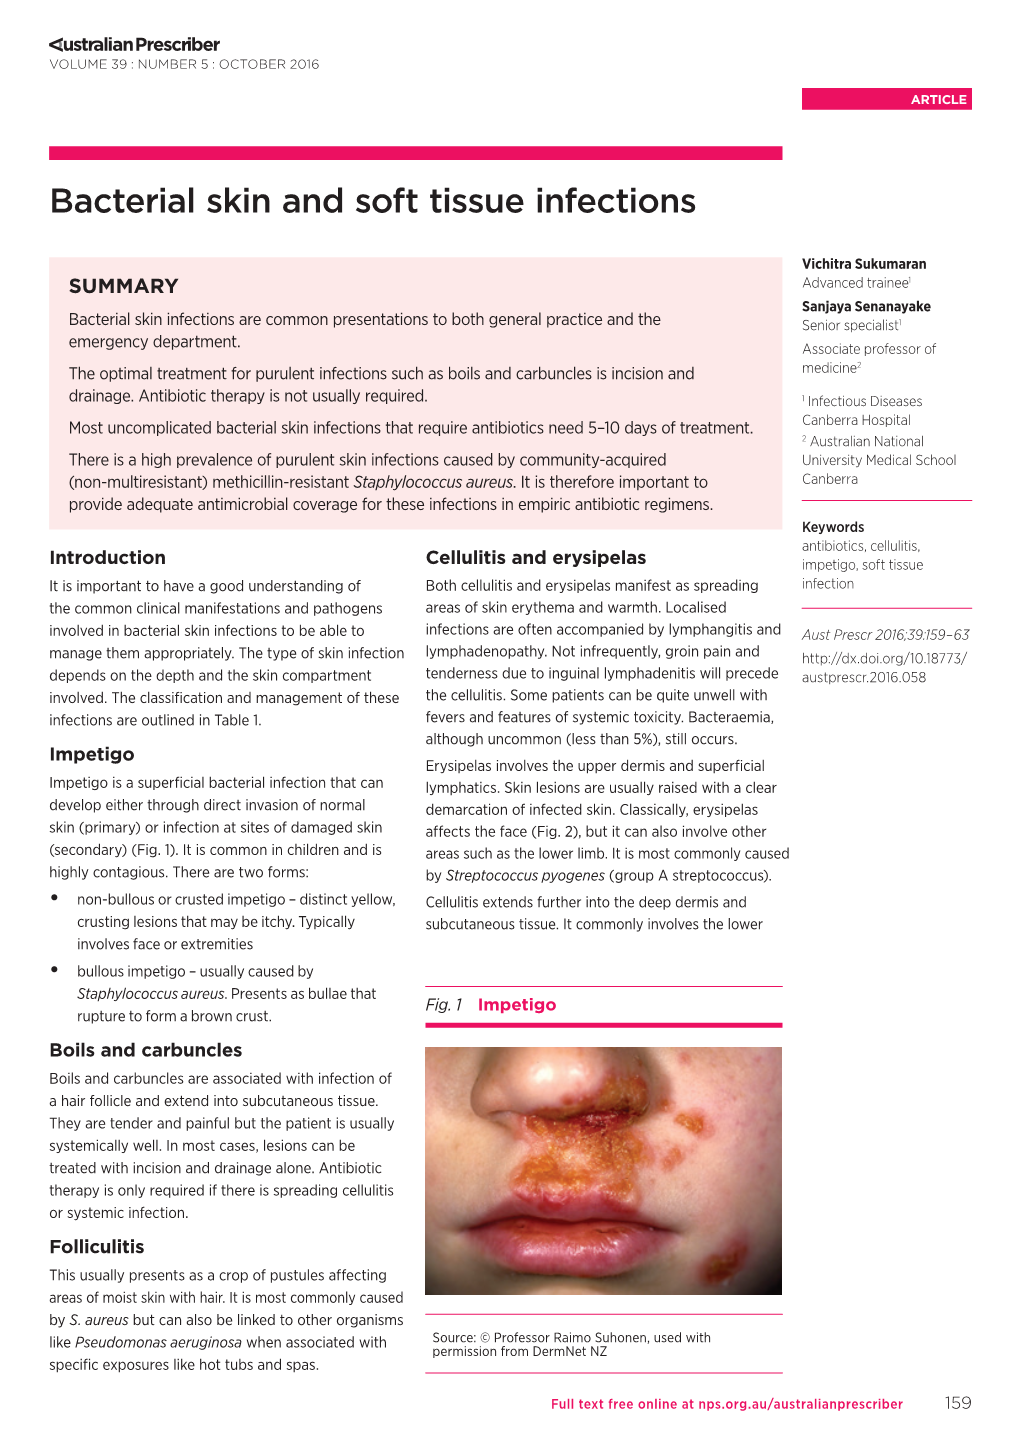 Bacterial Skin and Soft Tissue Infections